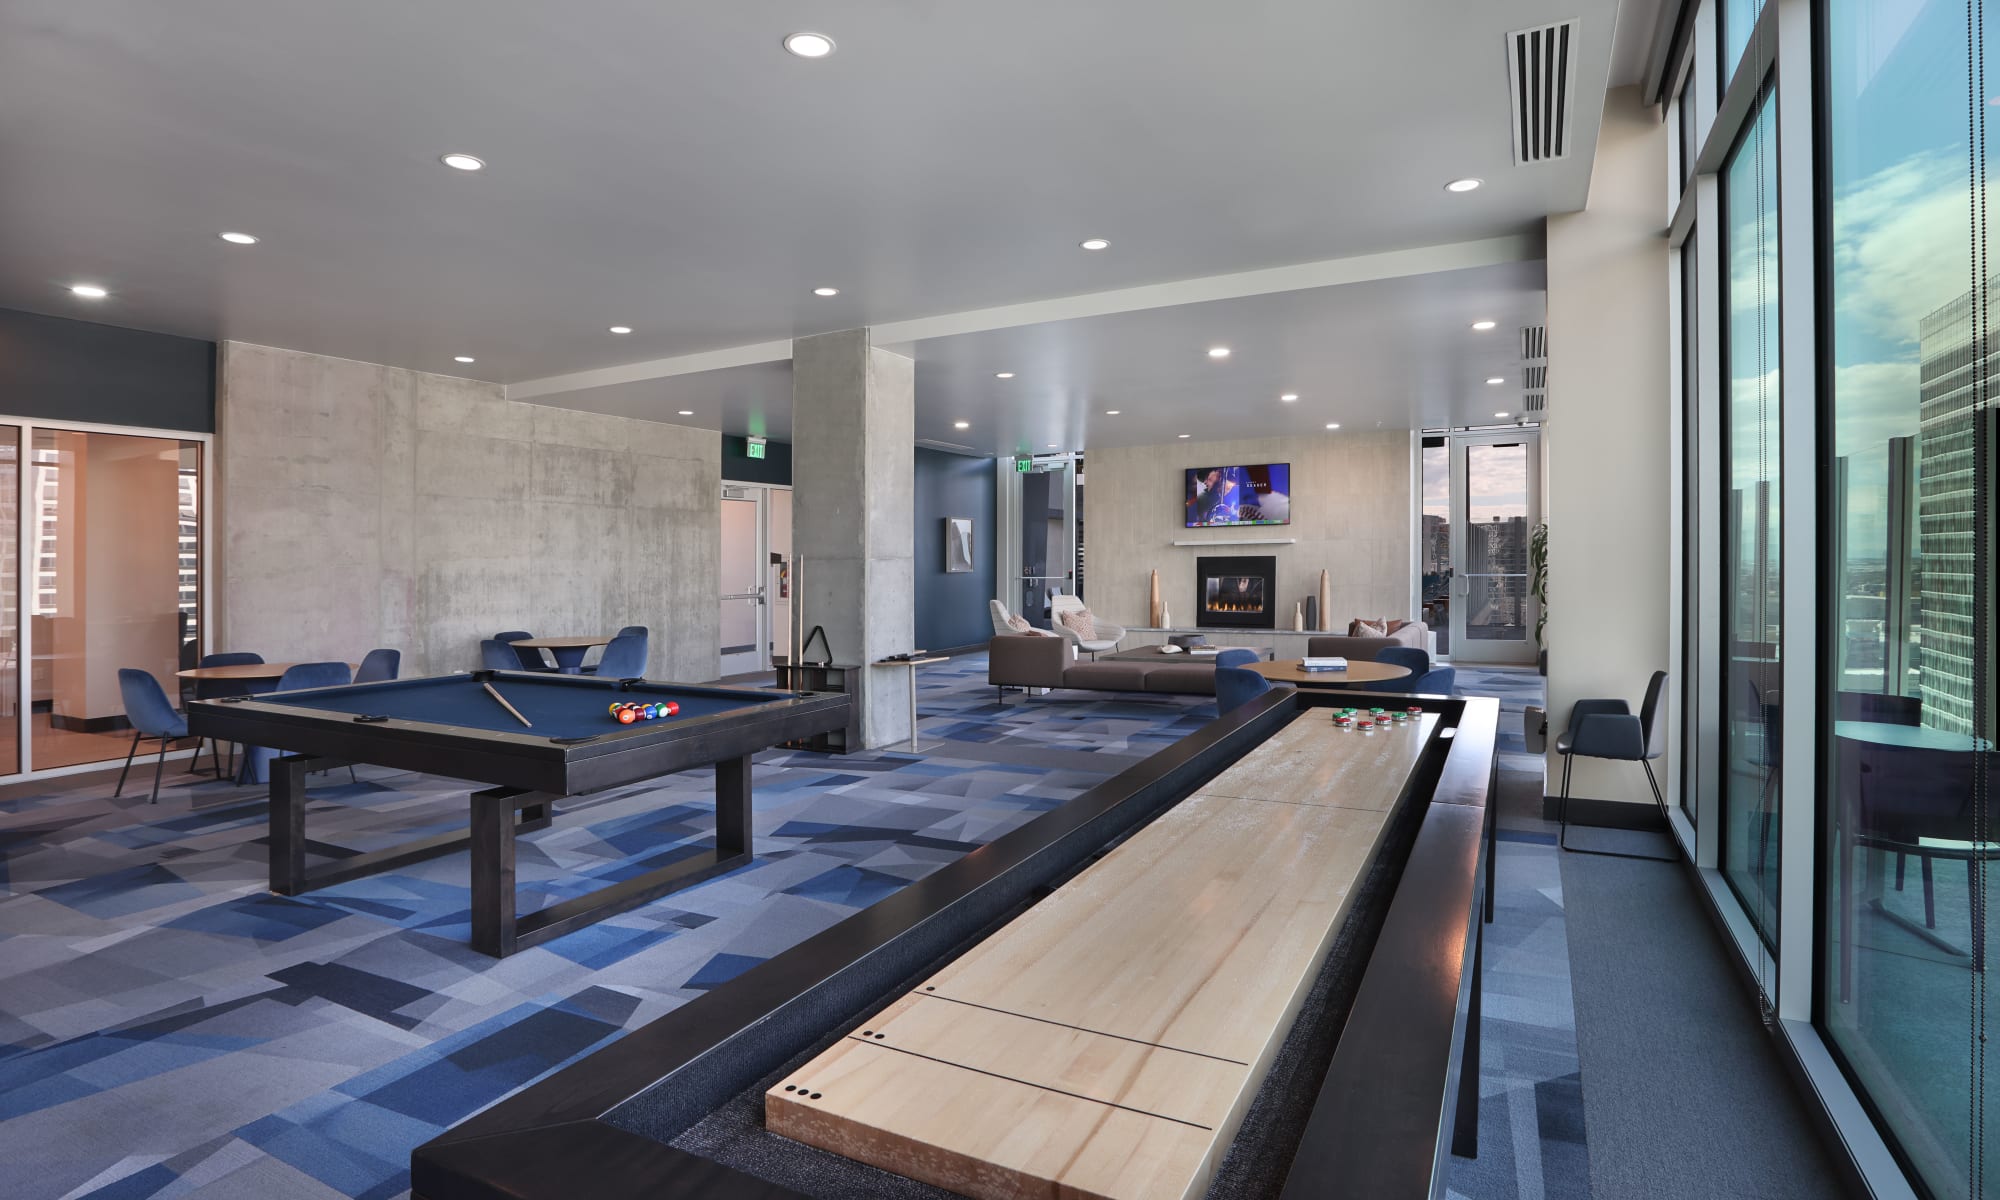 21st floor rooftop clubroom with shuffleboard, pool and lounge area with tv and fireplace at Luxury high-rise community of Liberty SKY in Salt Lake City, Utah